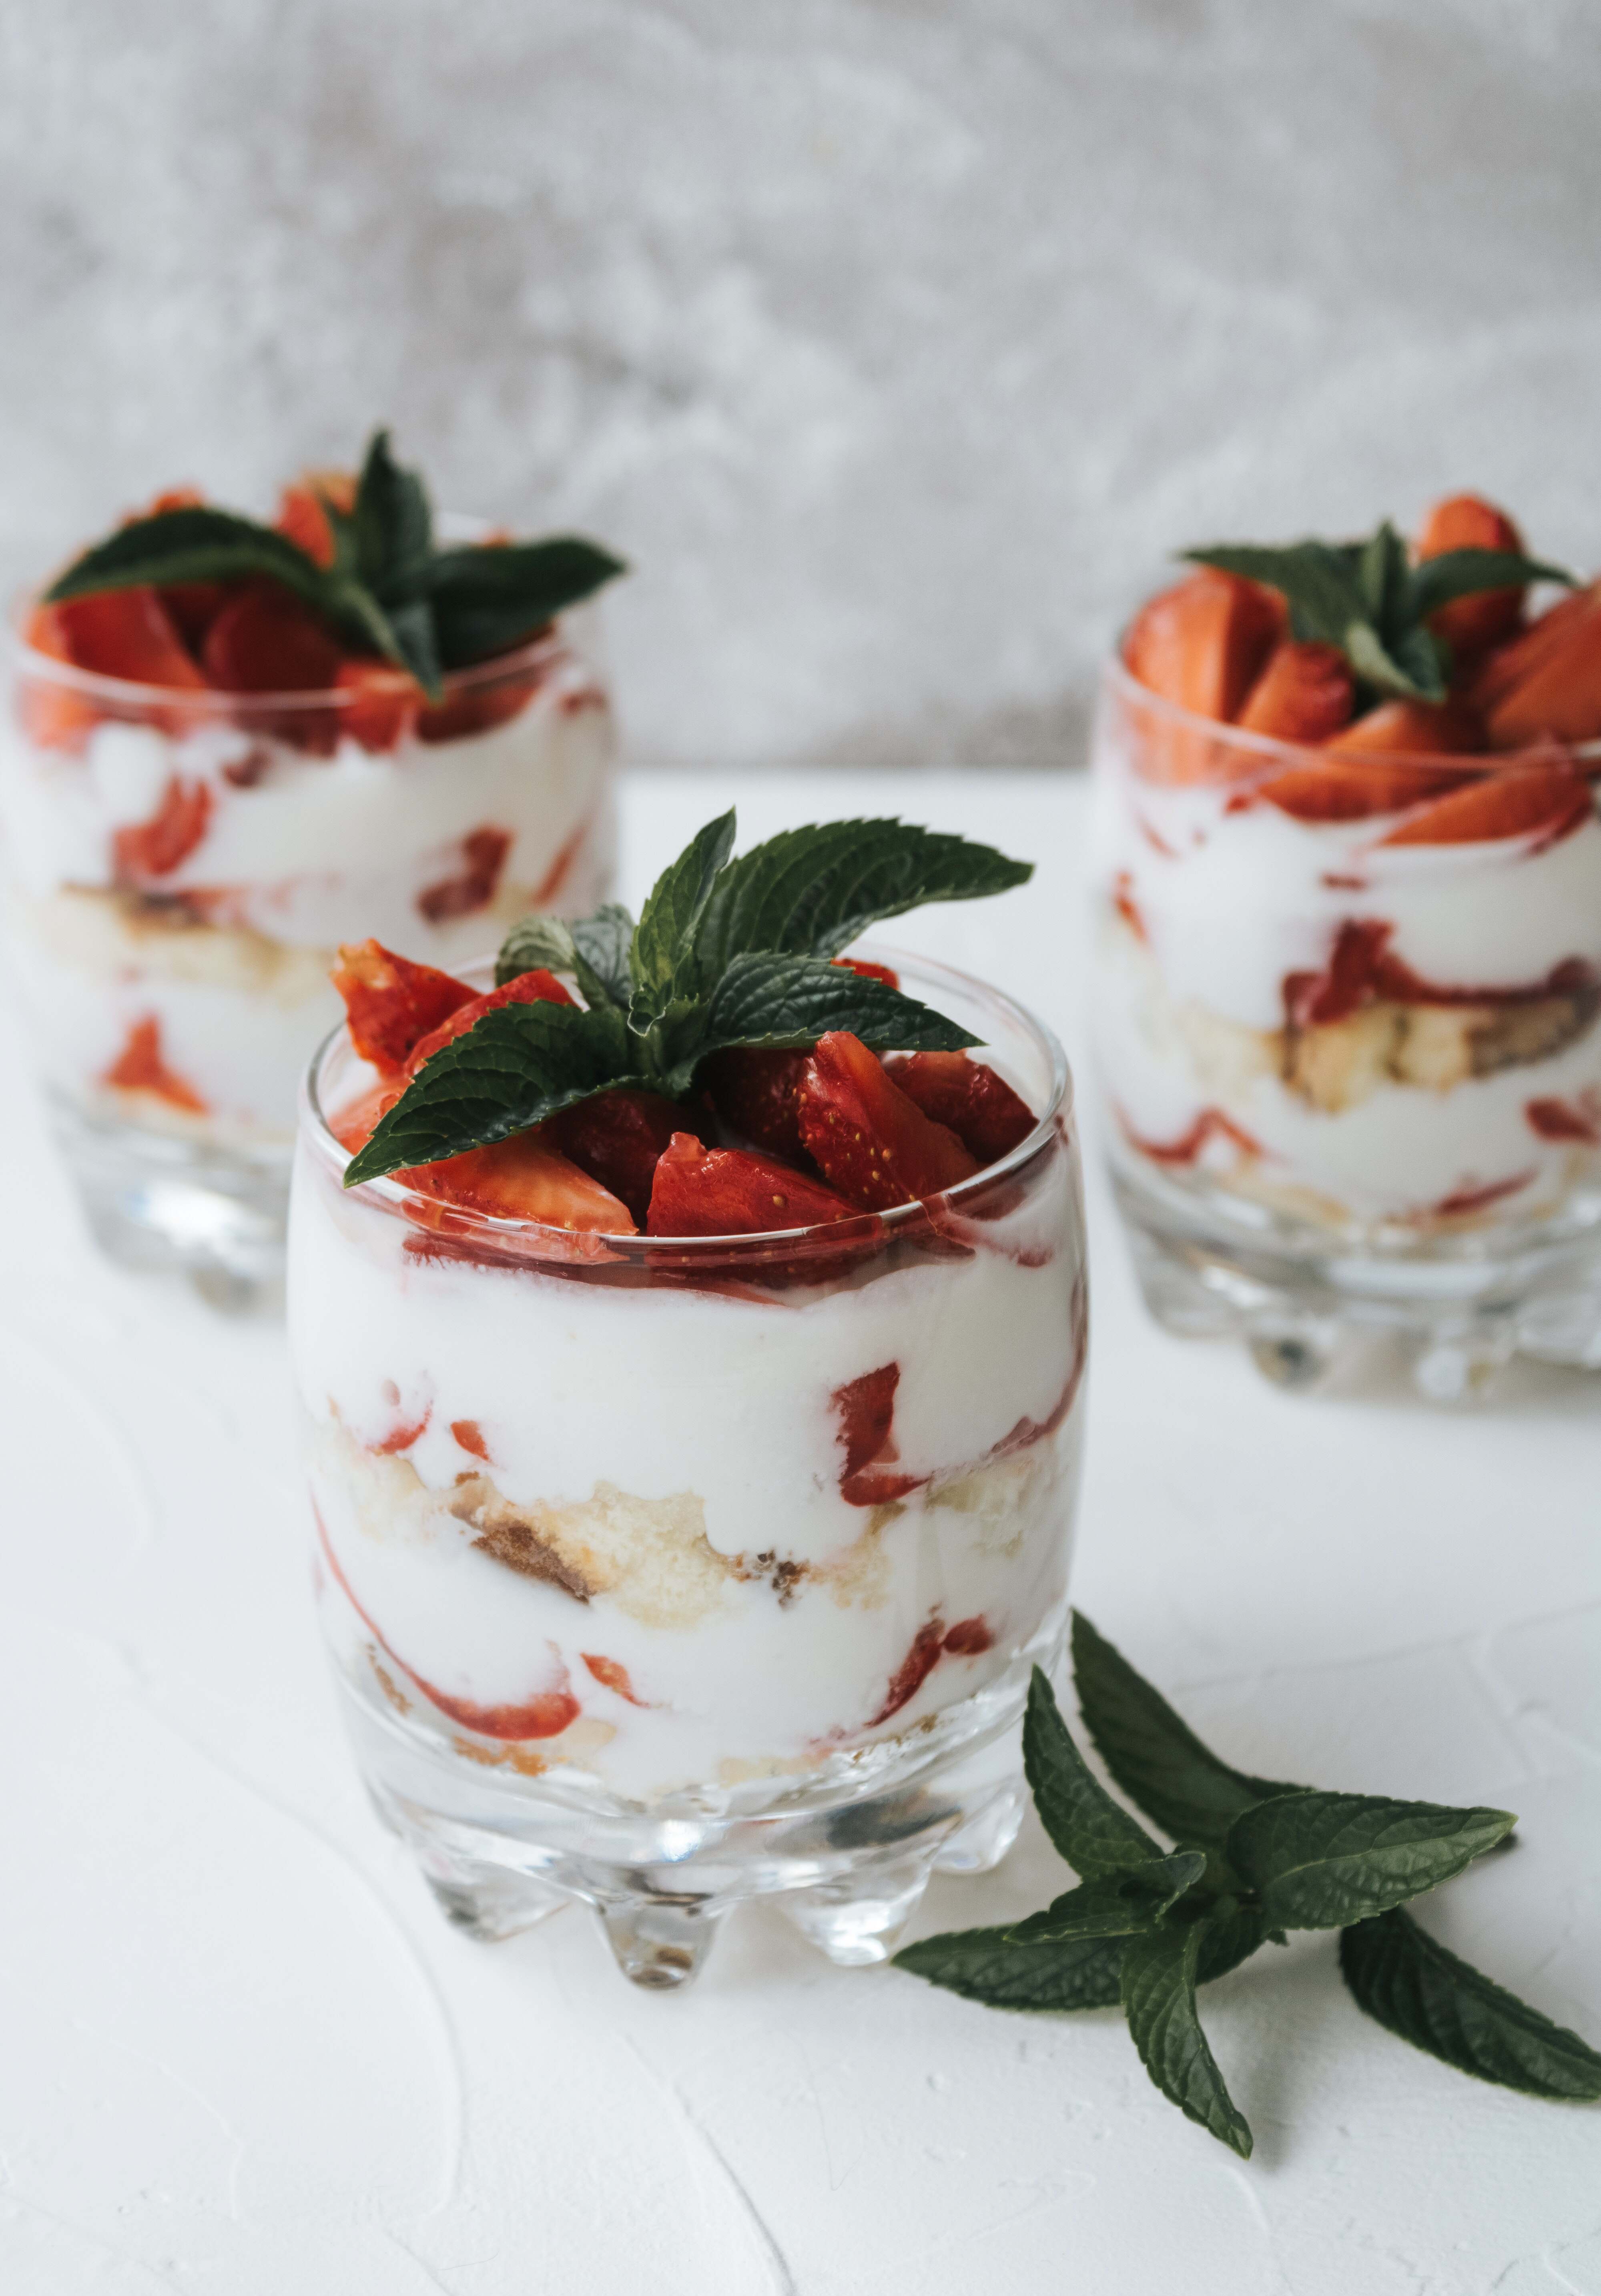 Nutty oats and strawberry parfait